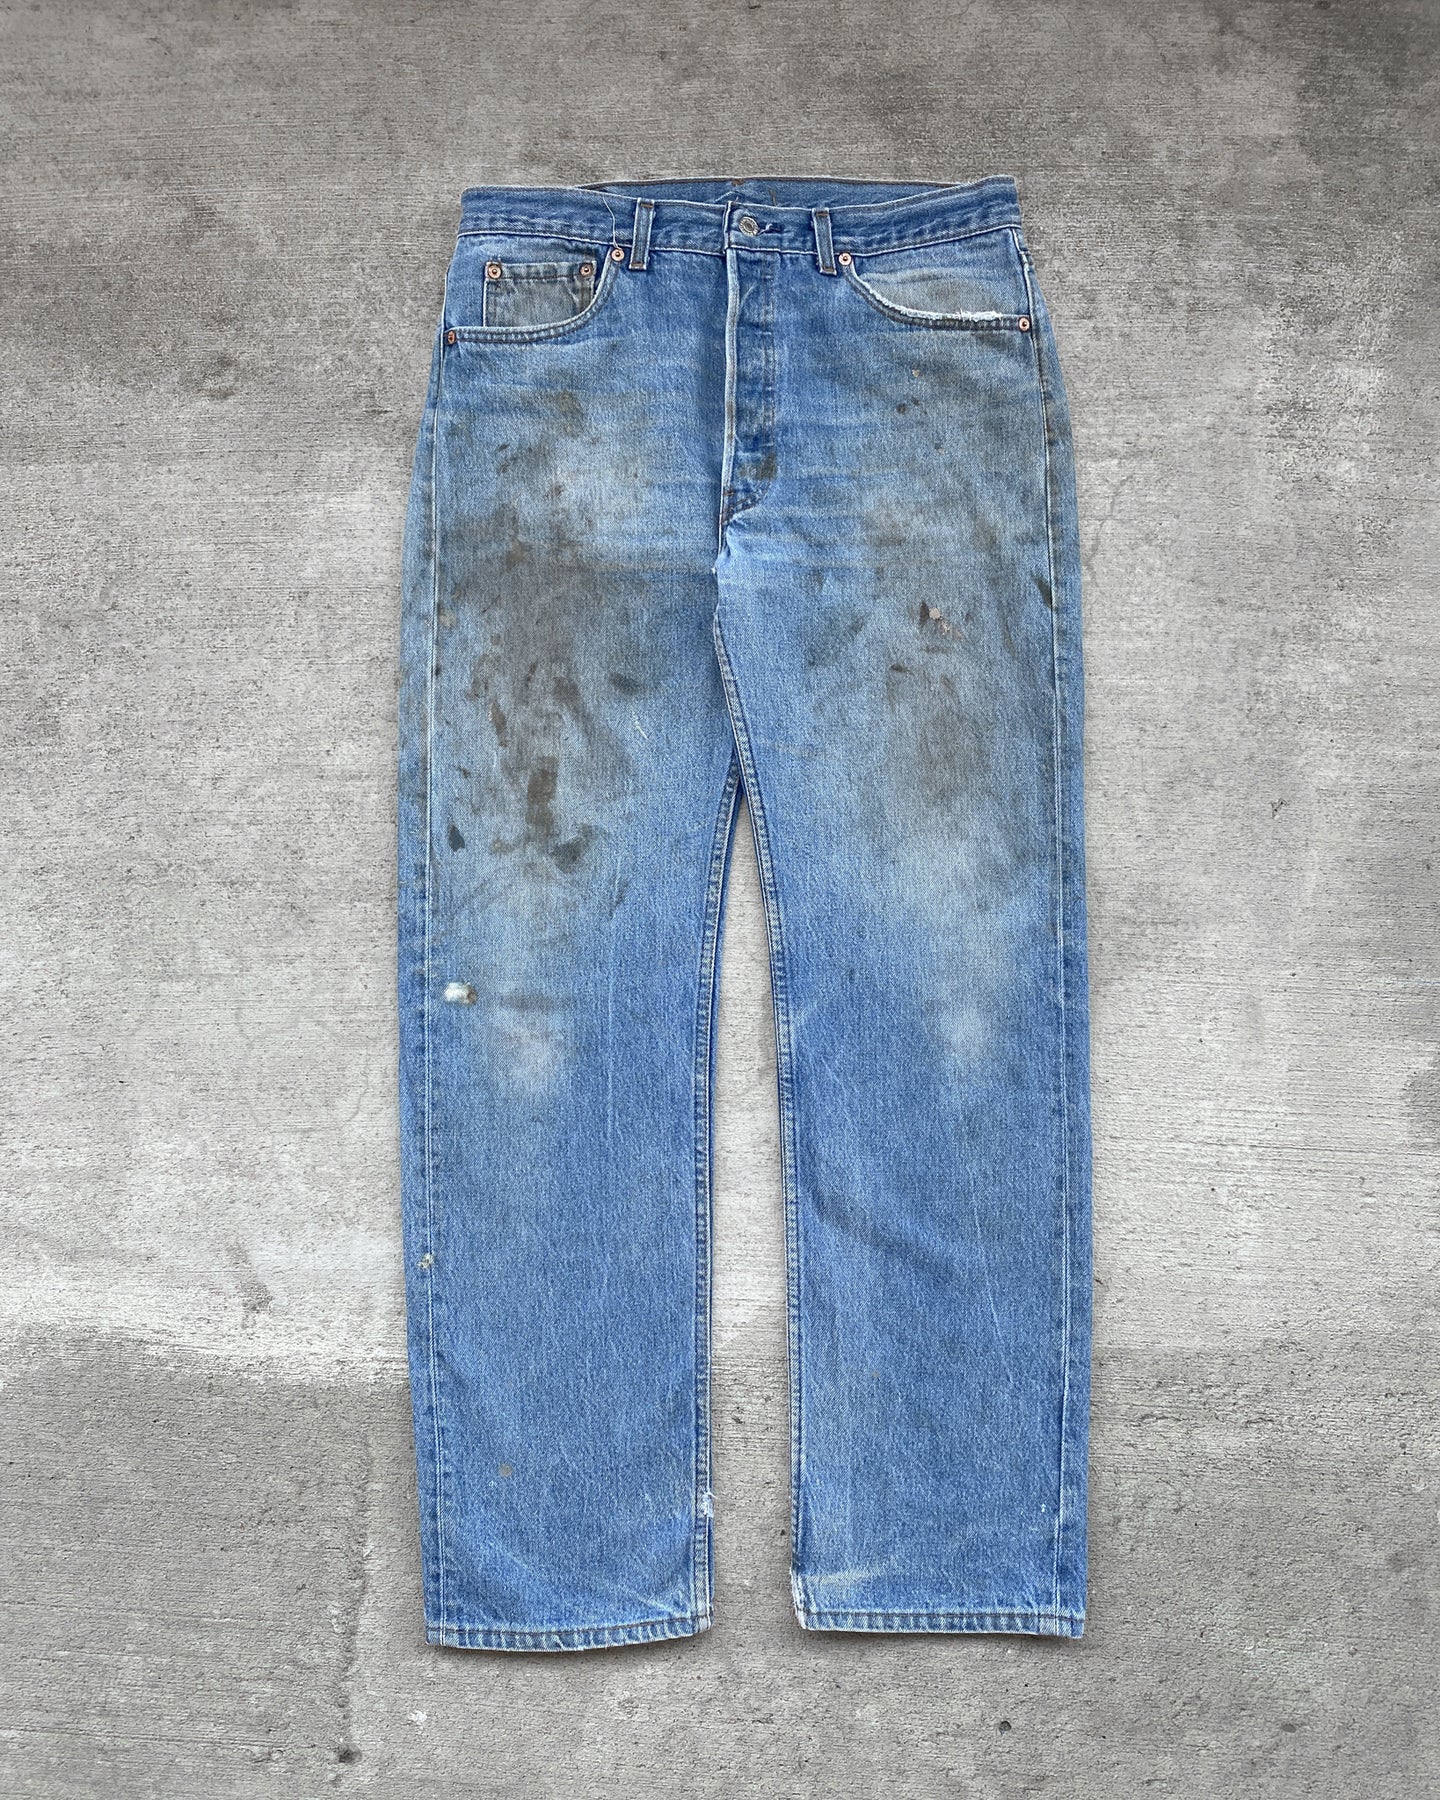 1990s Levi's Dirty Wash 501 - Size 34 x 31